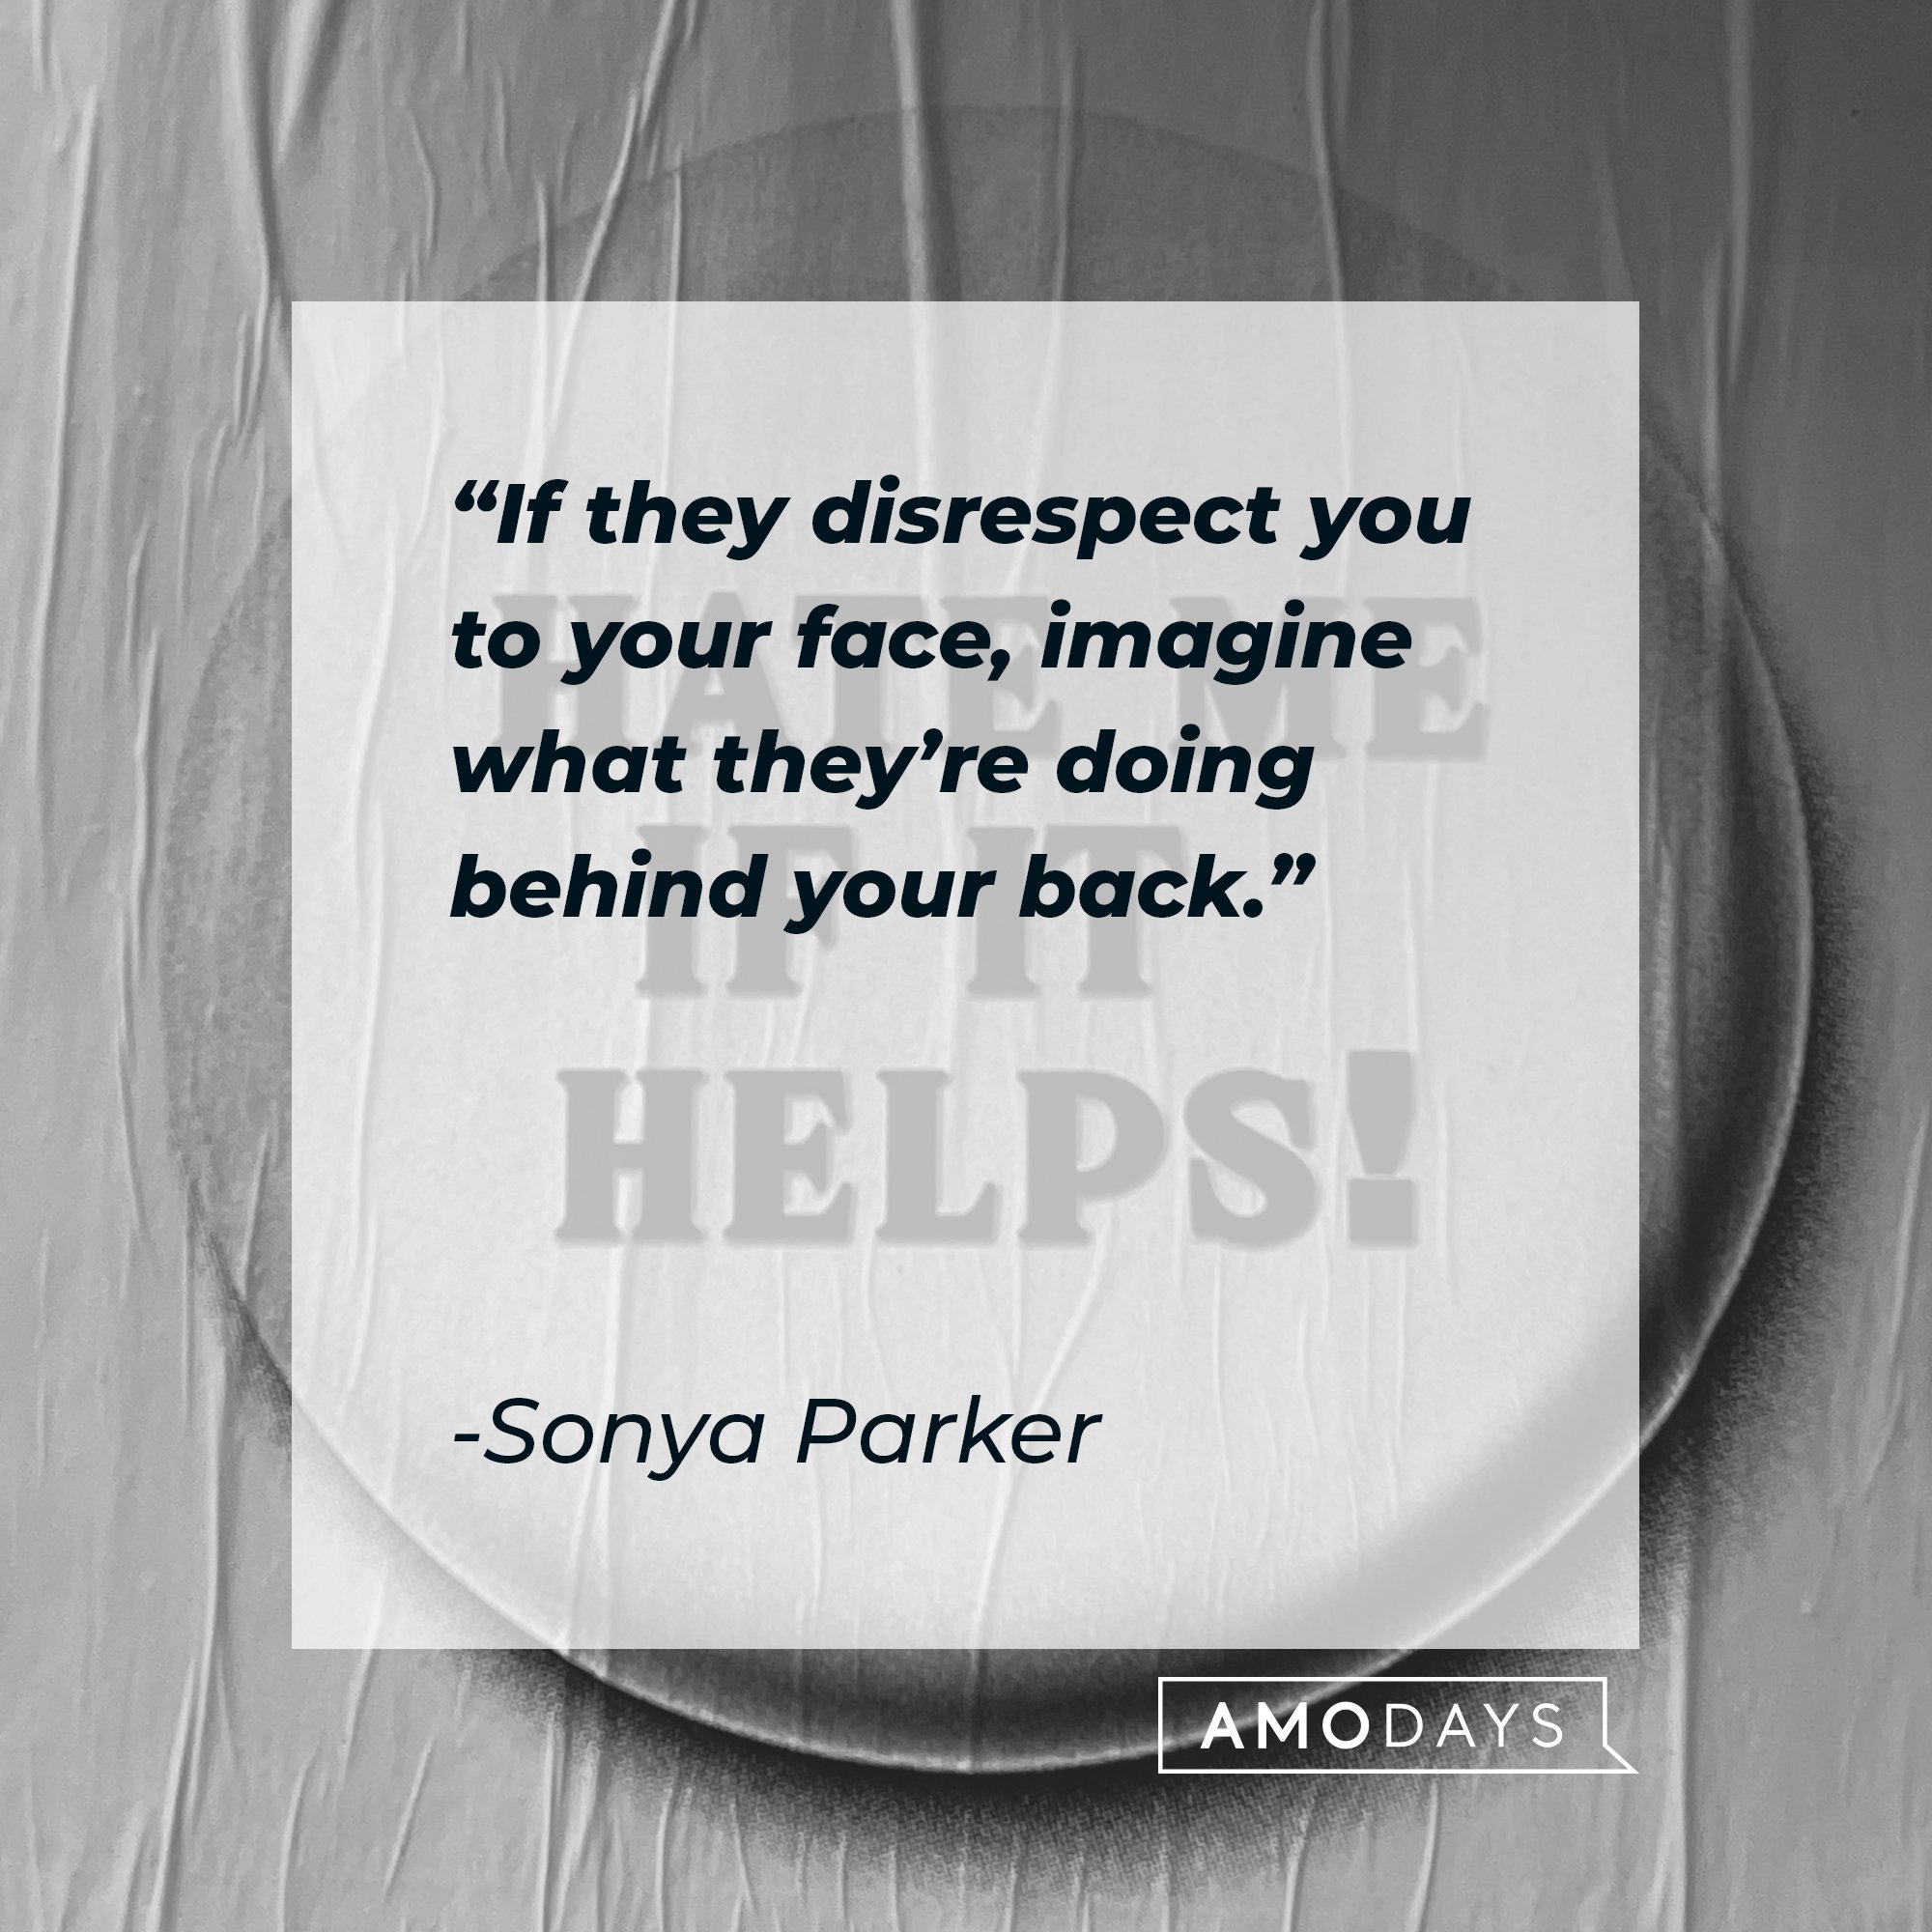 Sonya Parker's quote: "If they disrespect you to your face, imagine what they’re doing behind your back." | Image: AmoDays